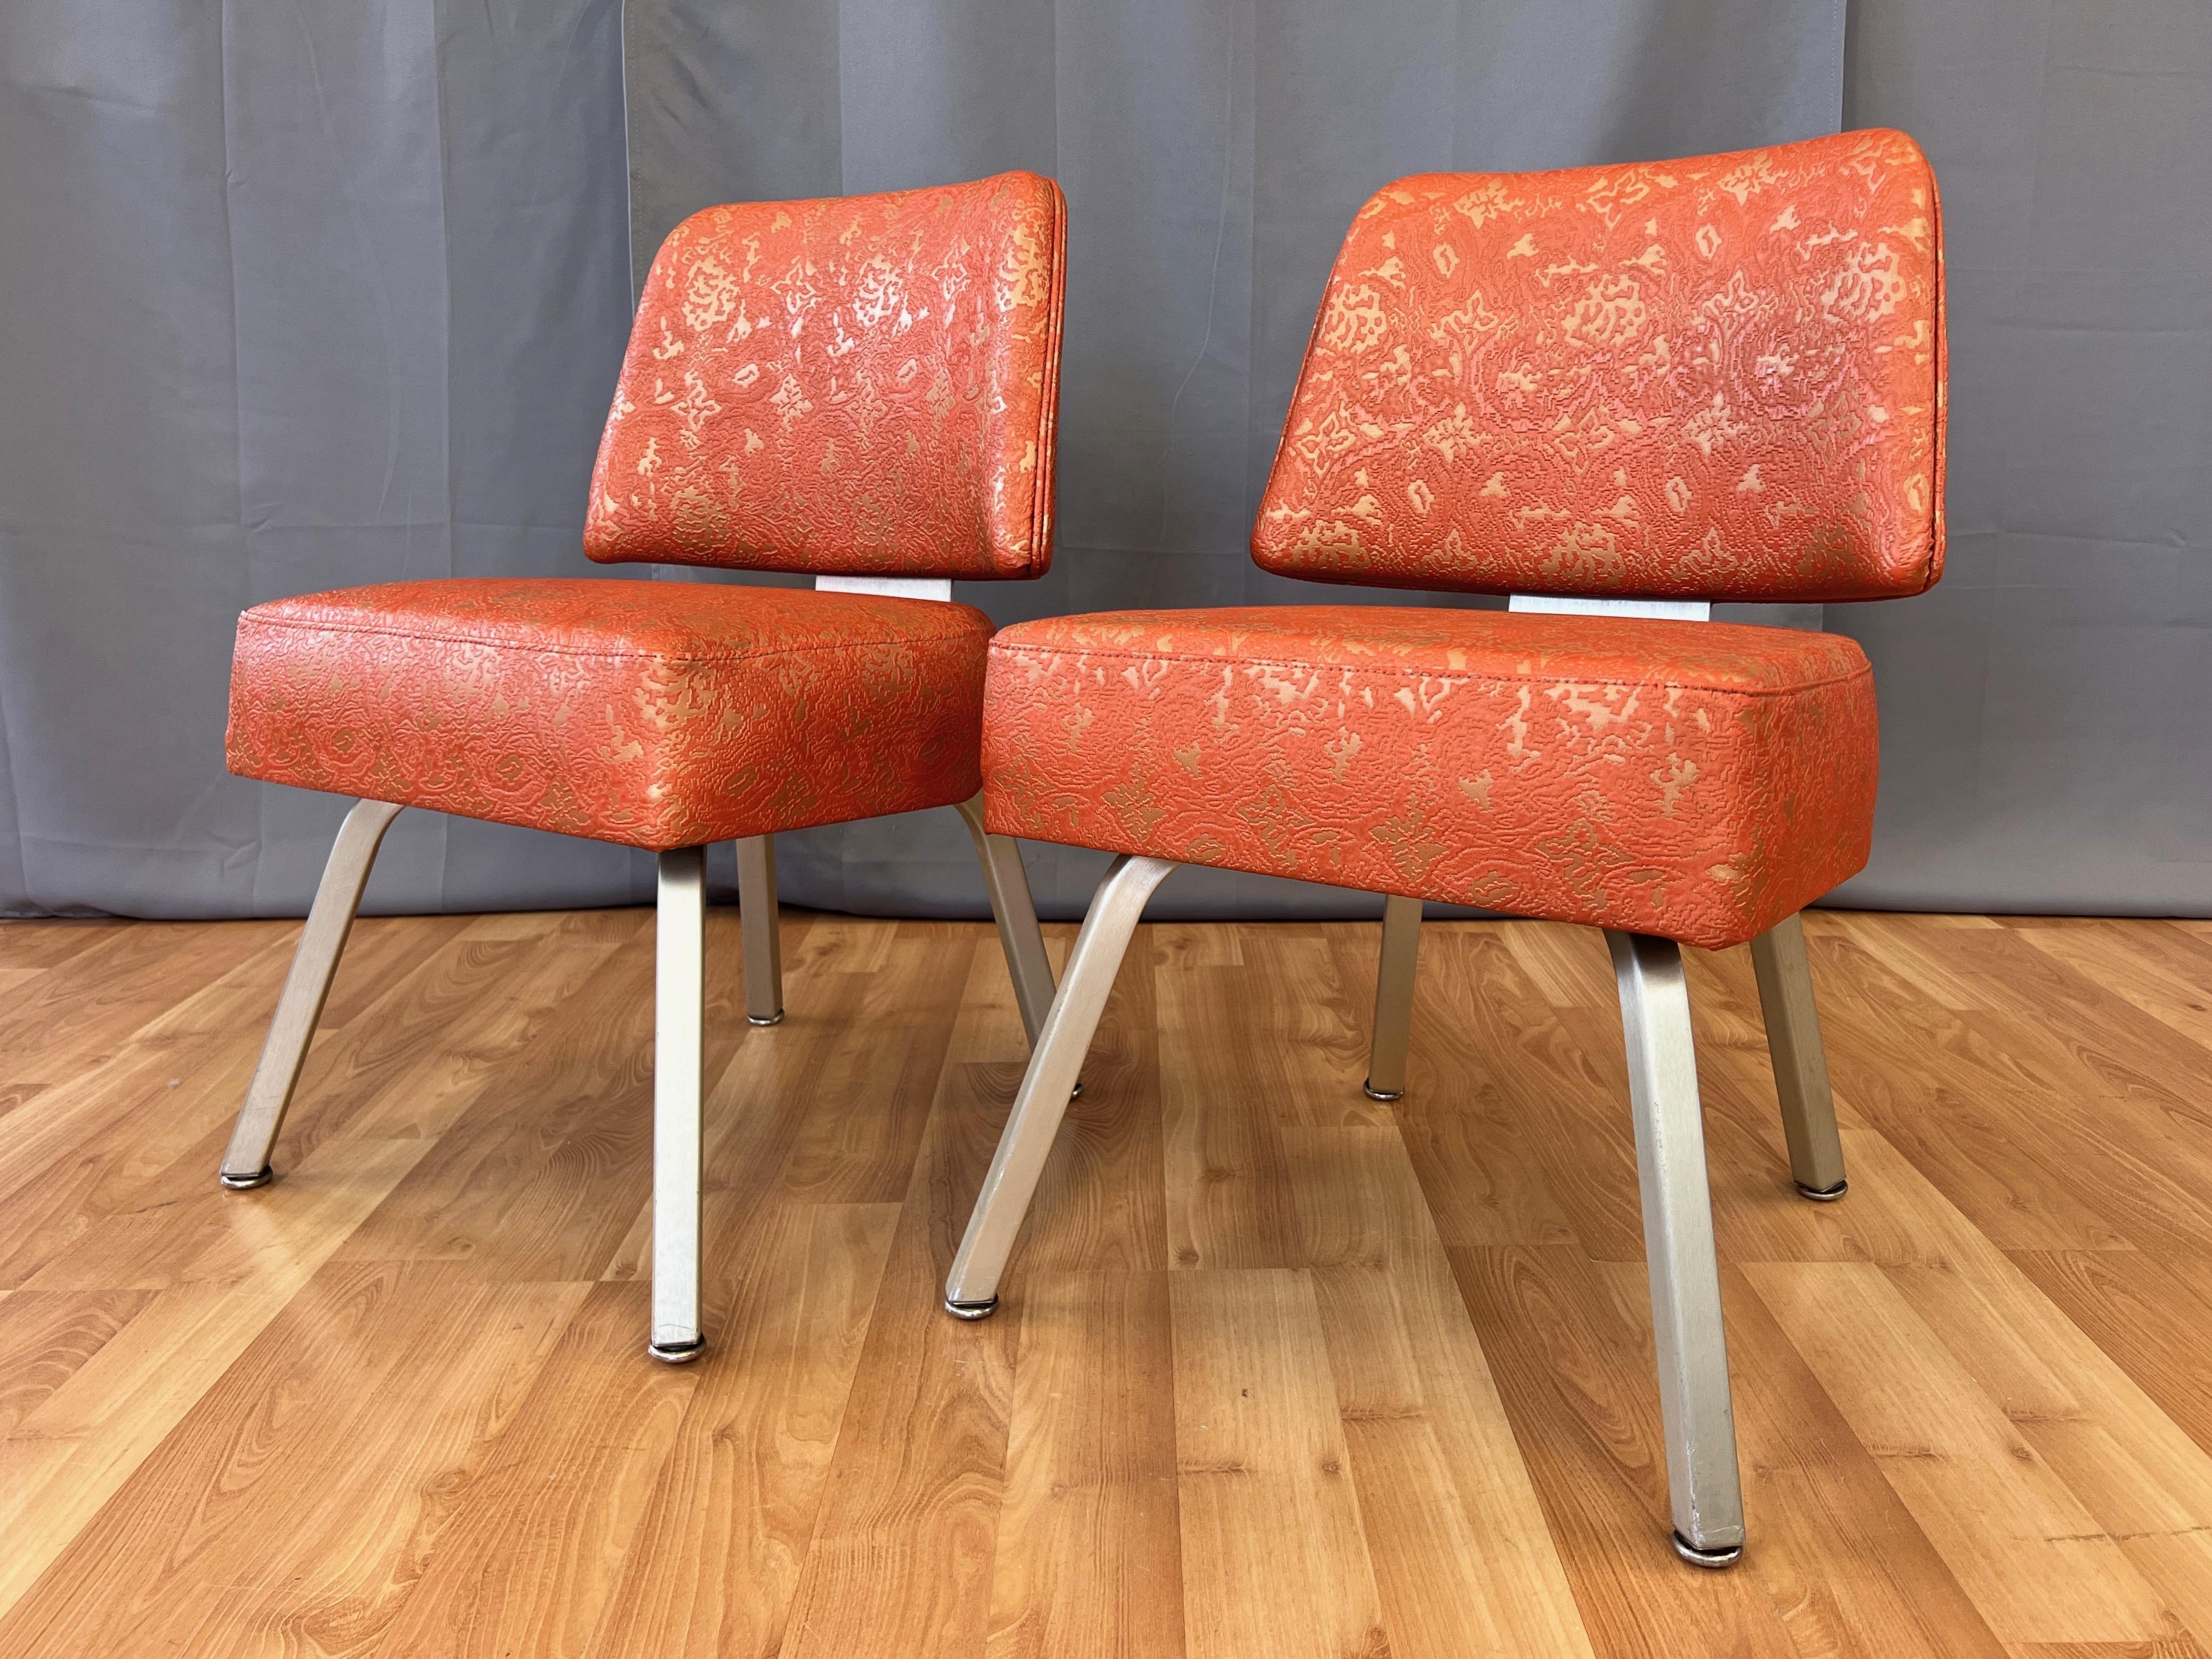 A fabulous pair of very uncommon circa 1960 orange & gold vinyl and brushed aluminum model L-90 side chairs by the Gasser Chair Co. from their “California Cocktail Lounge” line.

The epitome of classic American mid-century modern style, featuring